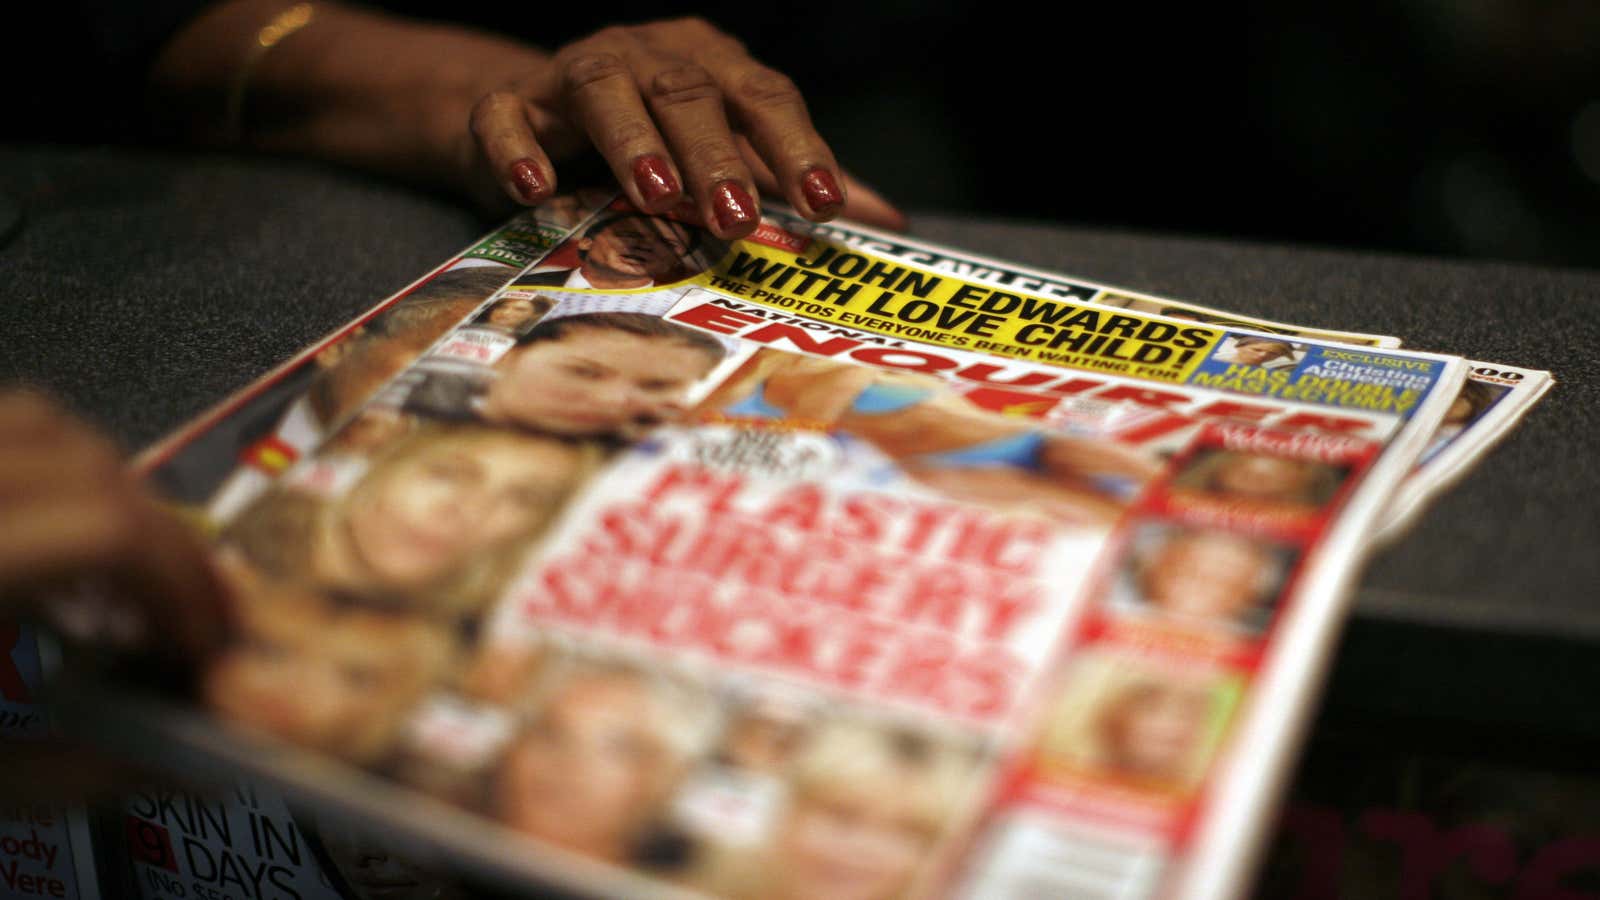 The National Enquirer has a long tradition of going after politicians, but not Trump.